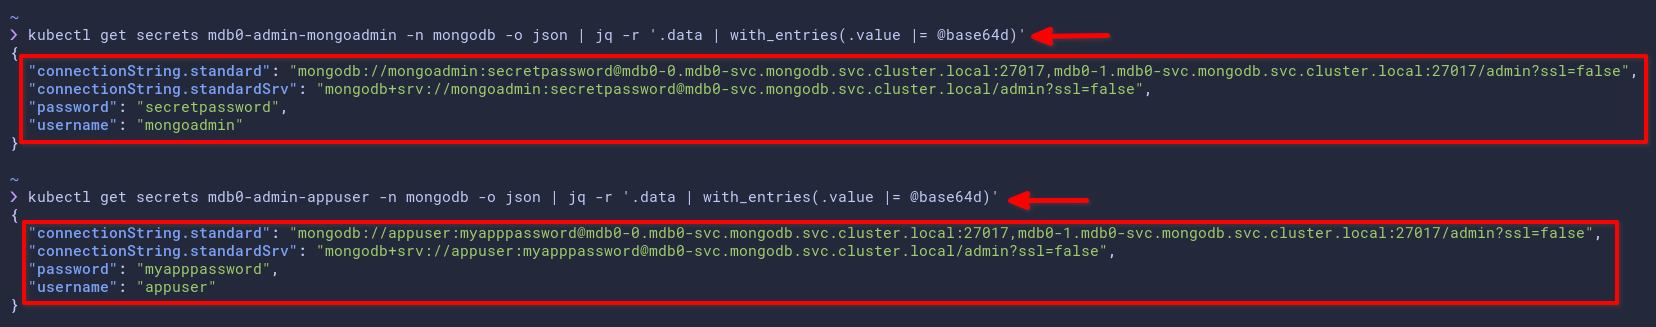 Retrieving Details of MongoDB User and Password, and Connections